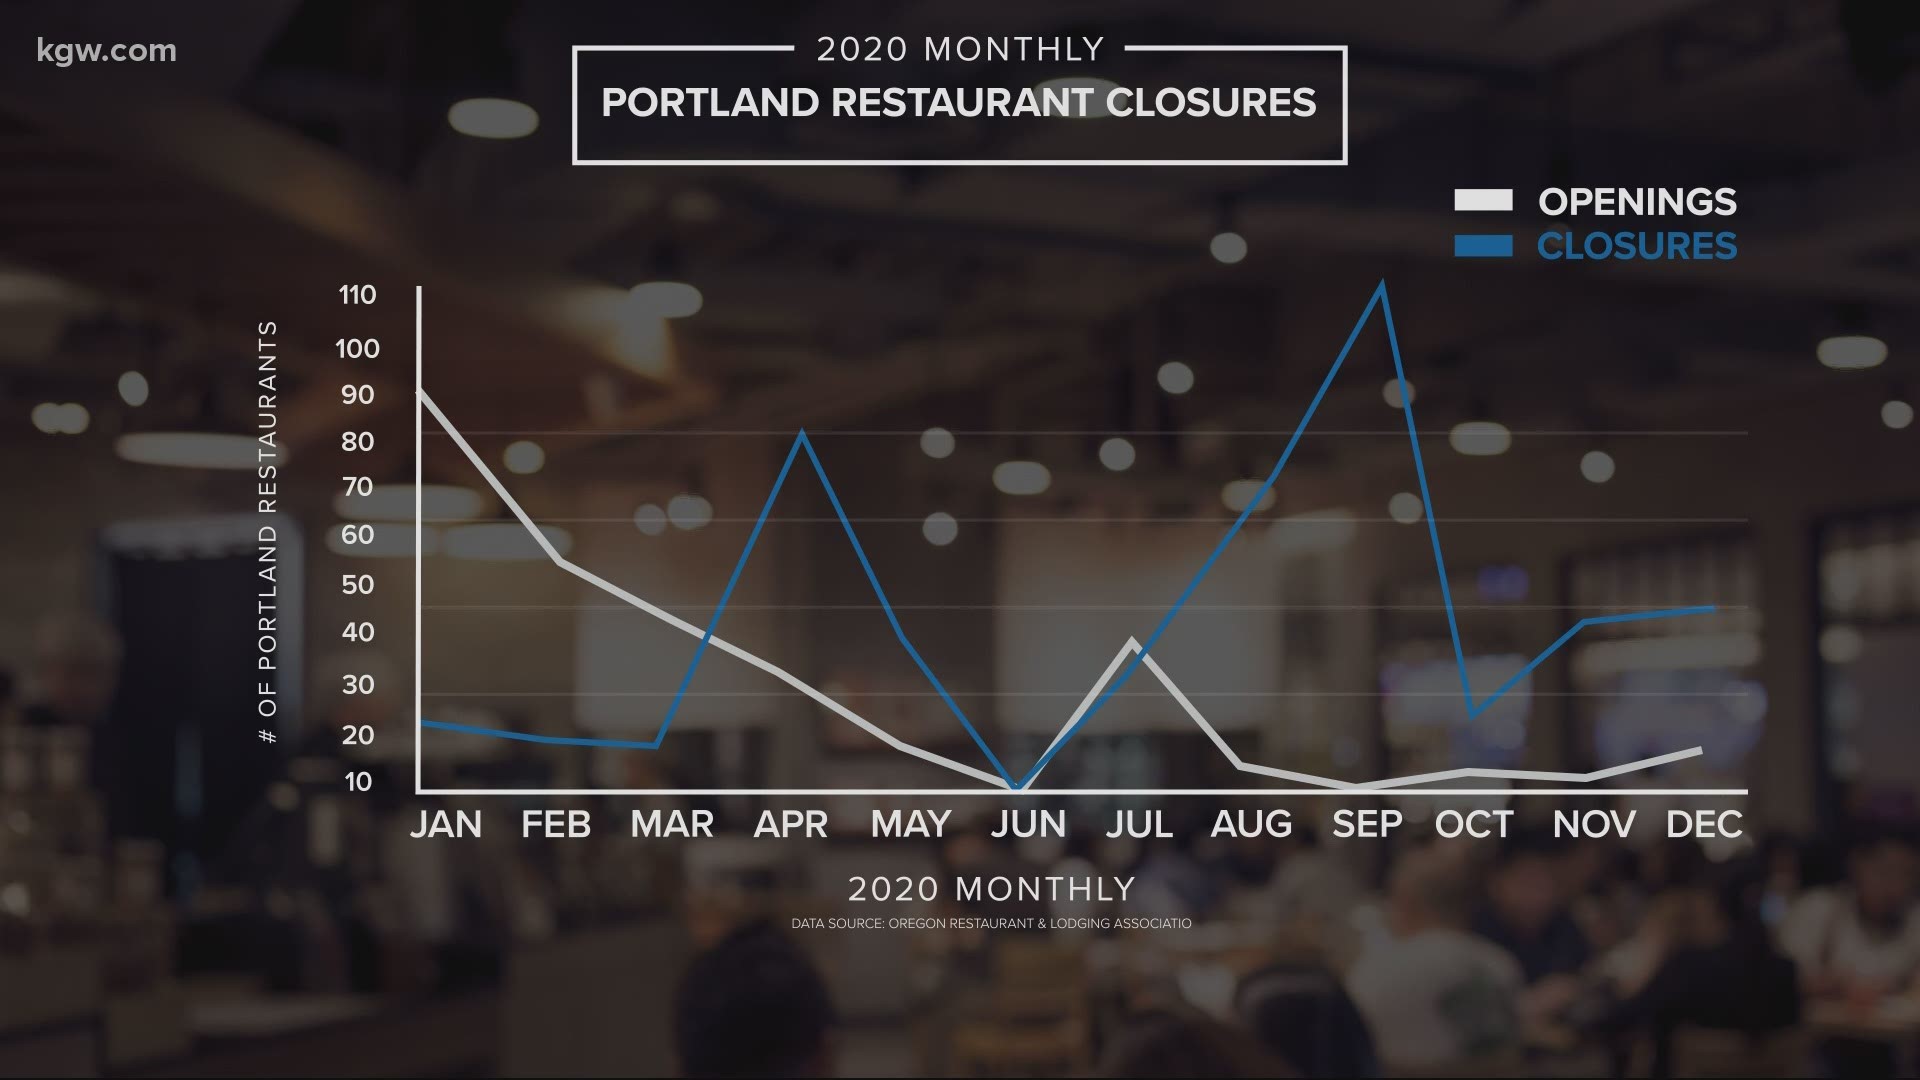 Portland is seeing the highest rate of restaurant closures in 10 years. Morgan Romero checked in on the state of the industry.